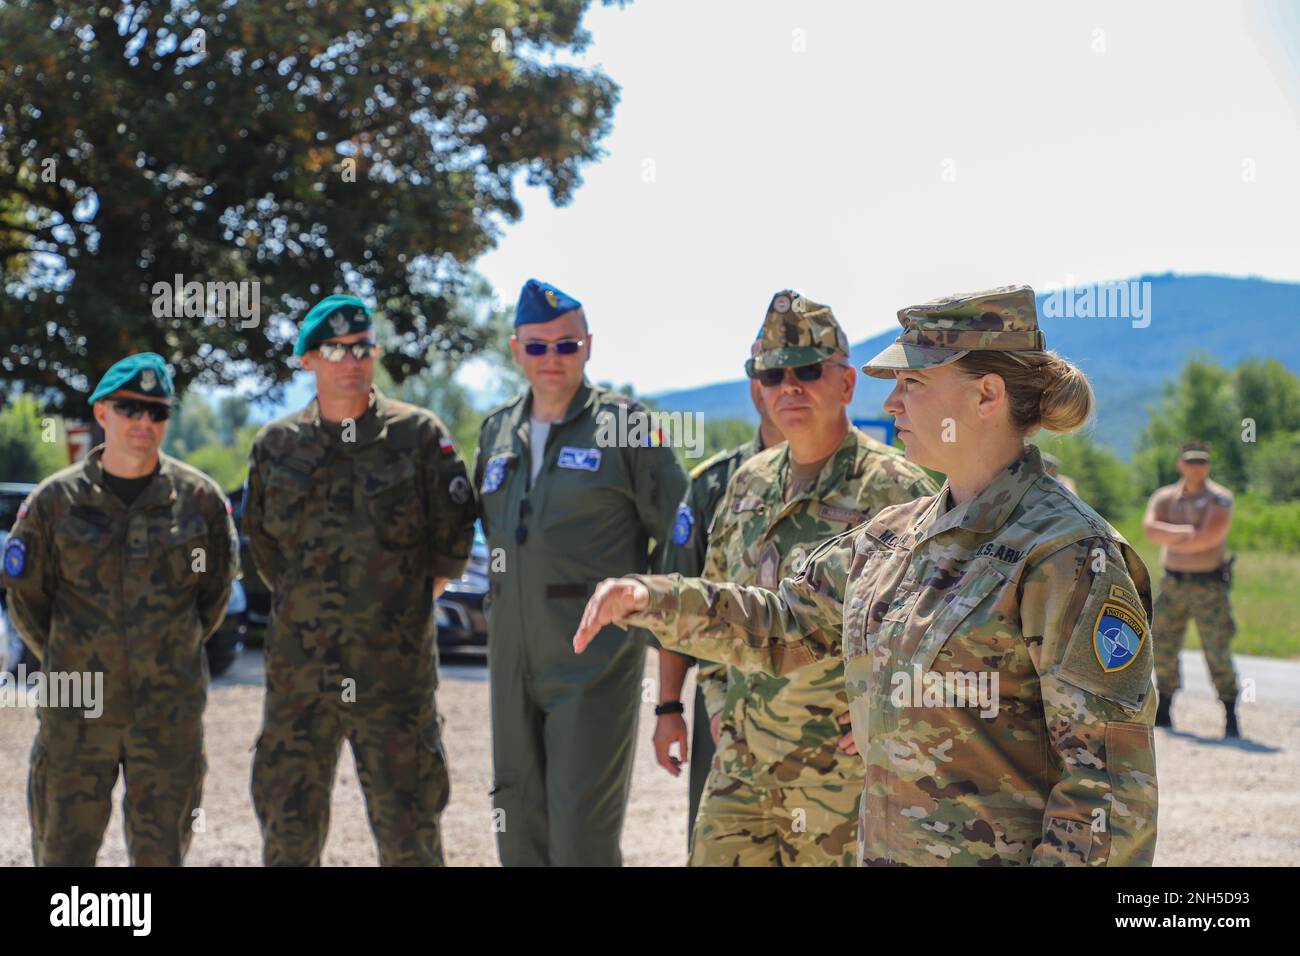 Brig. Gen. Pamela L. McGaha (right), Commander of NATO HQ Sarajevo, conducts a site visit at Kasarna Manjaca, Dobrnja, Bosnia-Herzegovina on July 17, 2022. Guard members assigned to the State Medical Detachment and 1-169th Aviation Regiment, Maryland Army National Guard, trained alongside active duty Soldiers from the 1st Squadron, 91st Cavalry Regiment, 173rd Airborne Brigade, 12th Combat Aviation Brigade, and the Armed Forces of Bosnia and Herzegovina soldiers in tactics, aviation, medical, and non-commissioned officer development. The Maryland National Guard will celebrate 20 years of partn Stock Photo